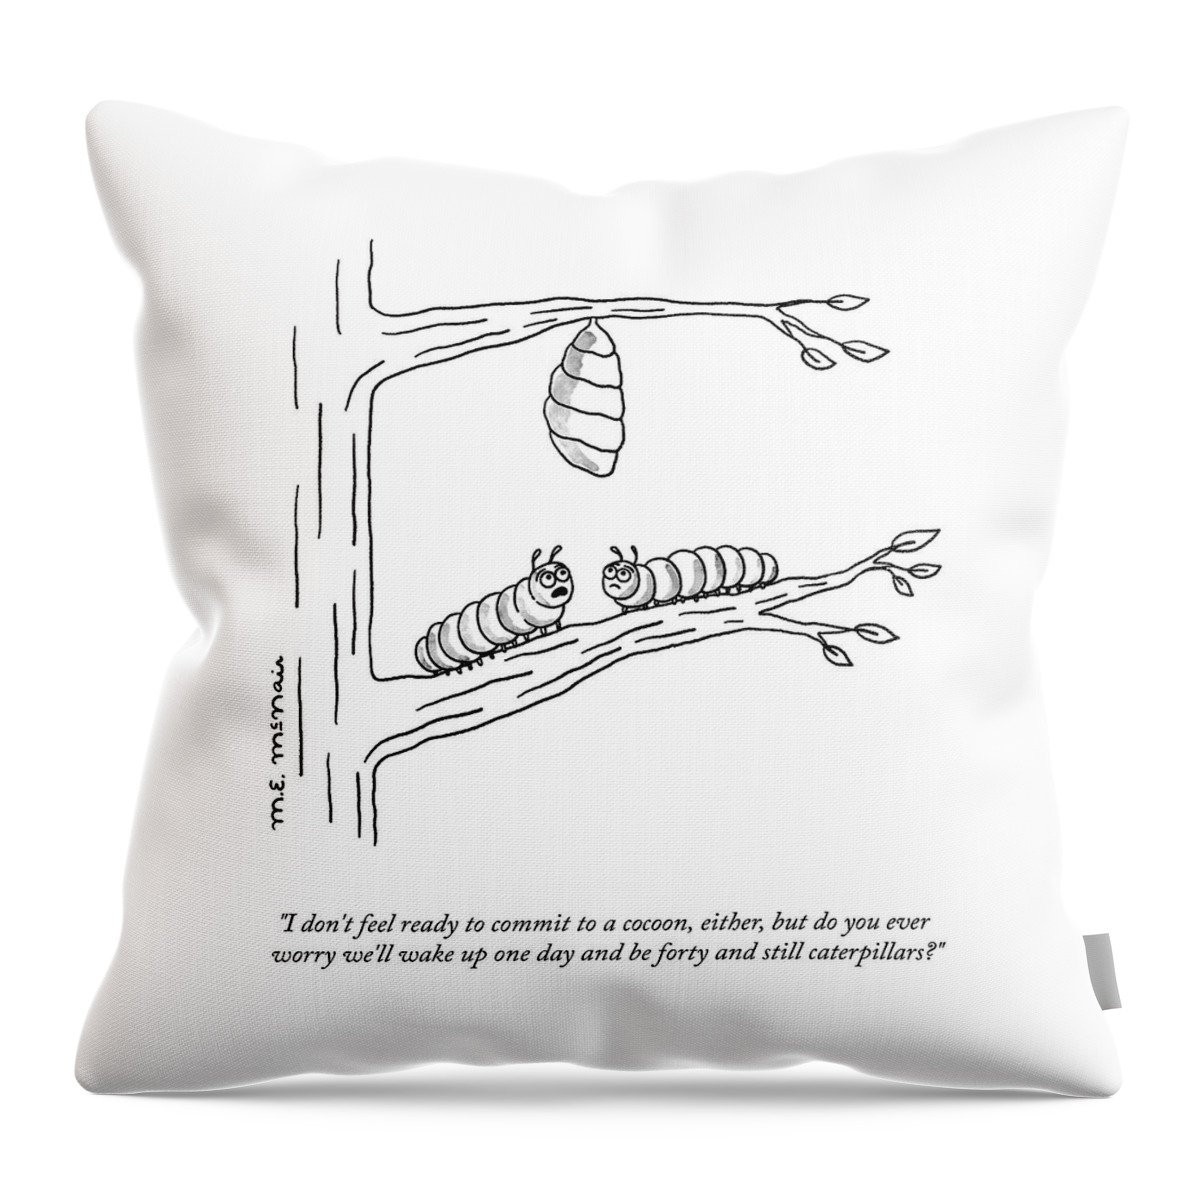 Commit To A Cocoon Throw Pillow